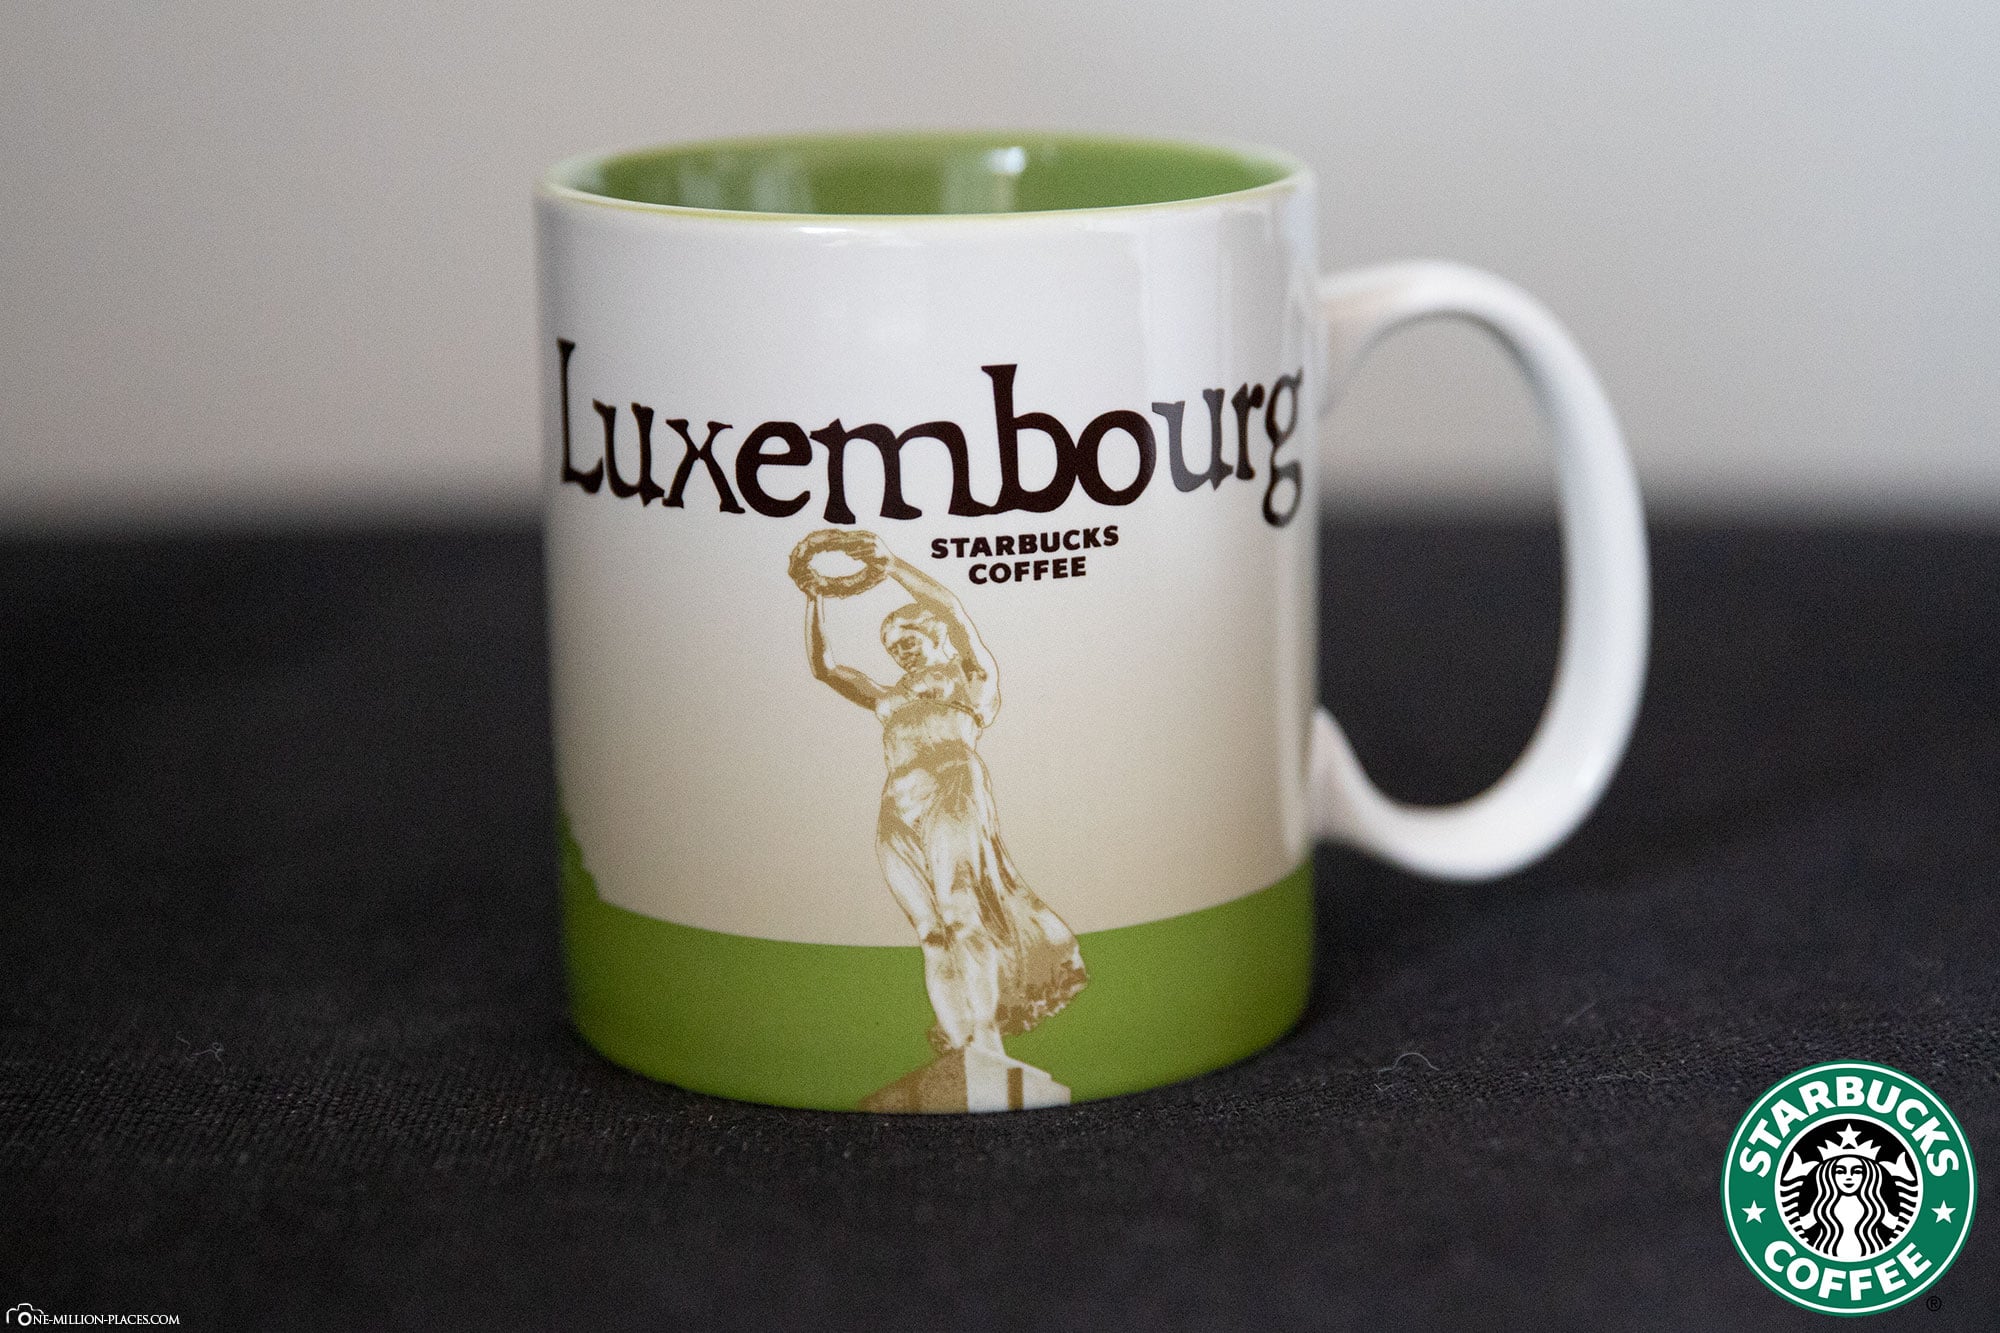 Luxembourg, Starbucks Cup, Global Icon Series, City Mugs, Collection, Travelreport